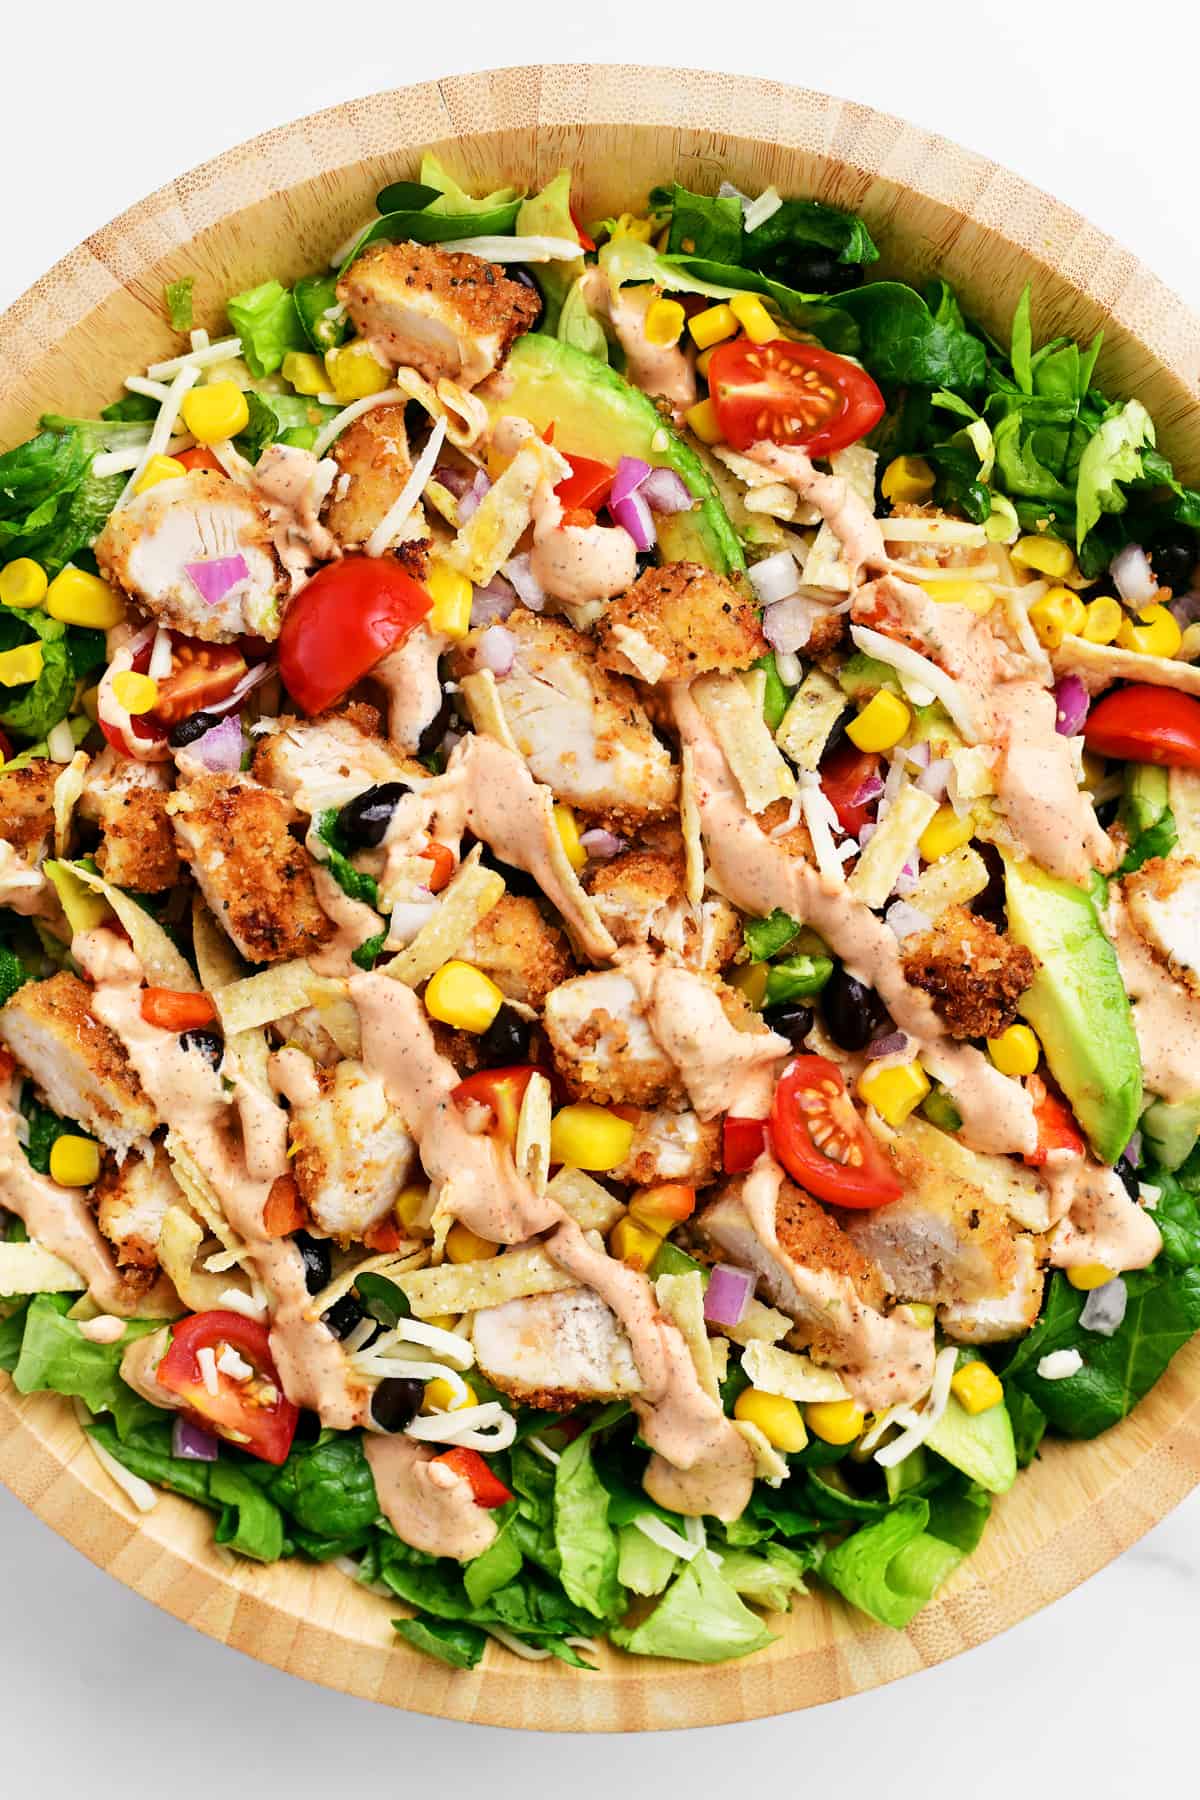 chipotle ranch dressing on a chicken salad